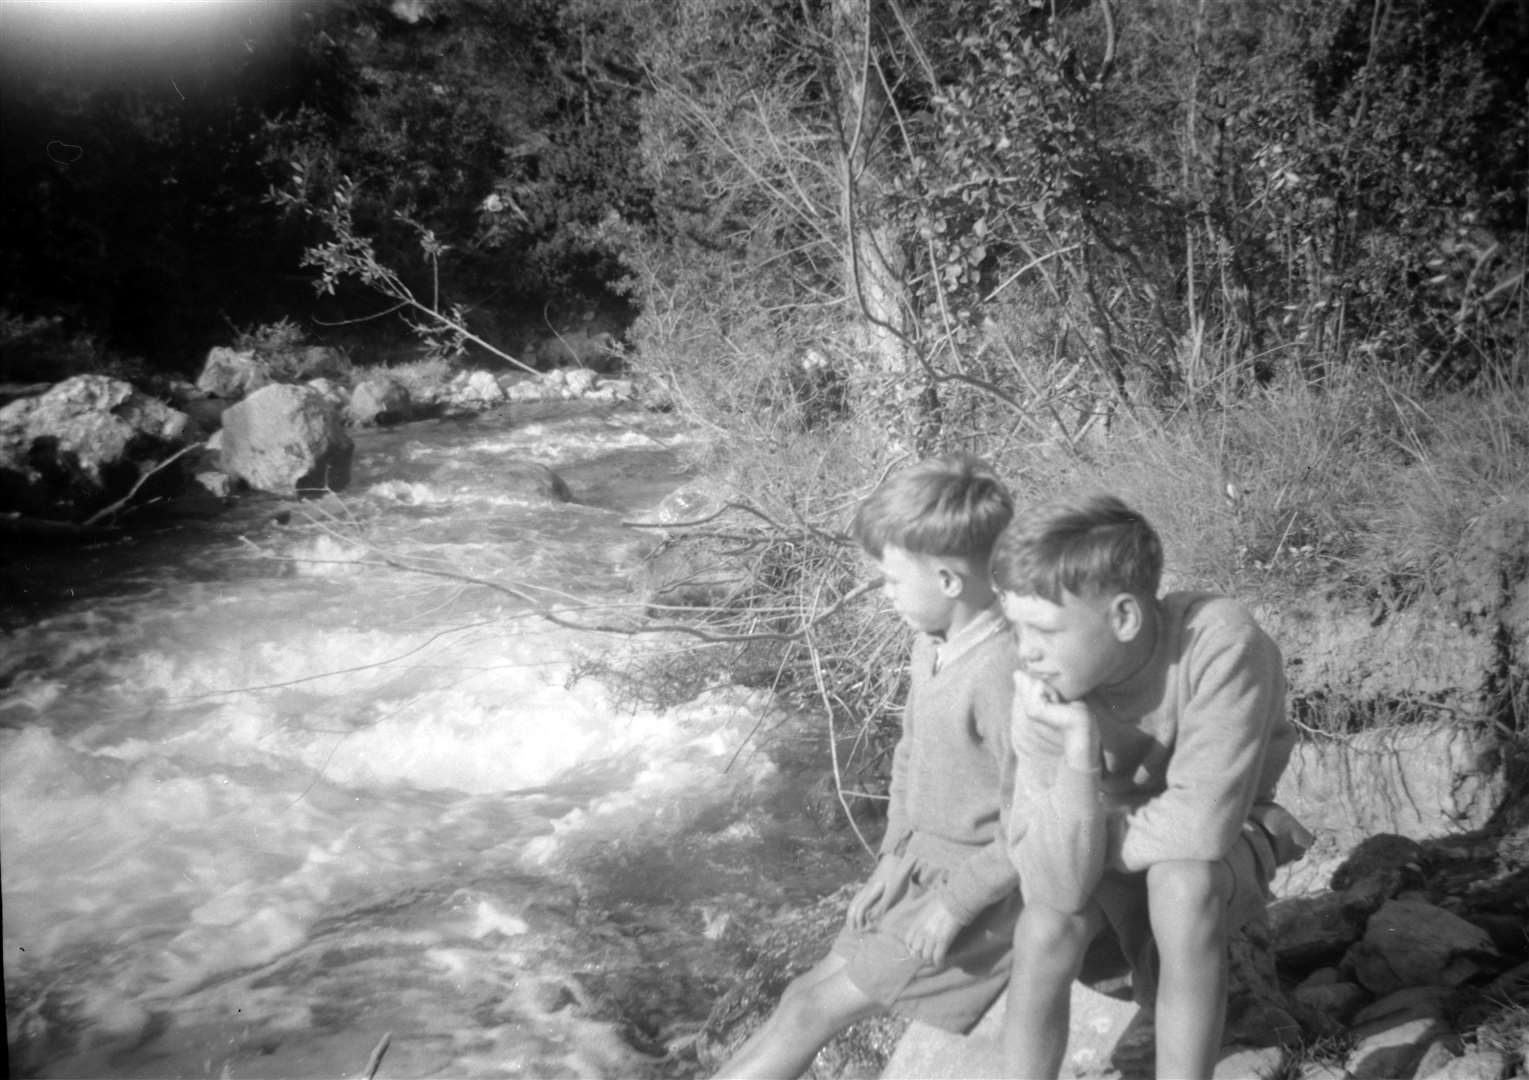 Chris Jagger (left) with brother Mick. "We were always fascinated by rivers and their multi-layered currents" writes Chris. Image from Talking to Myself by Chris Jagger